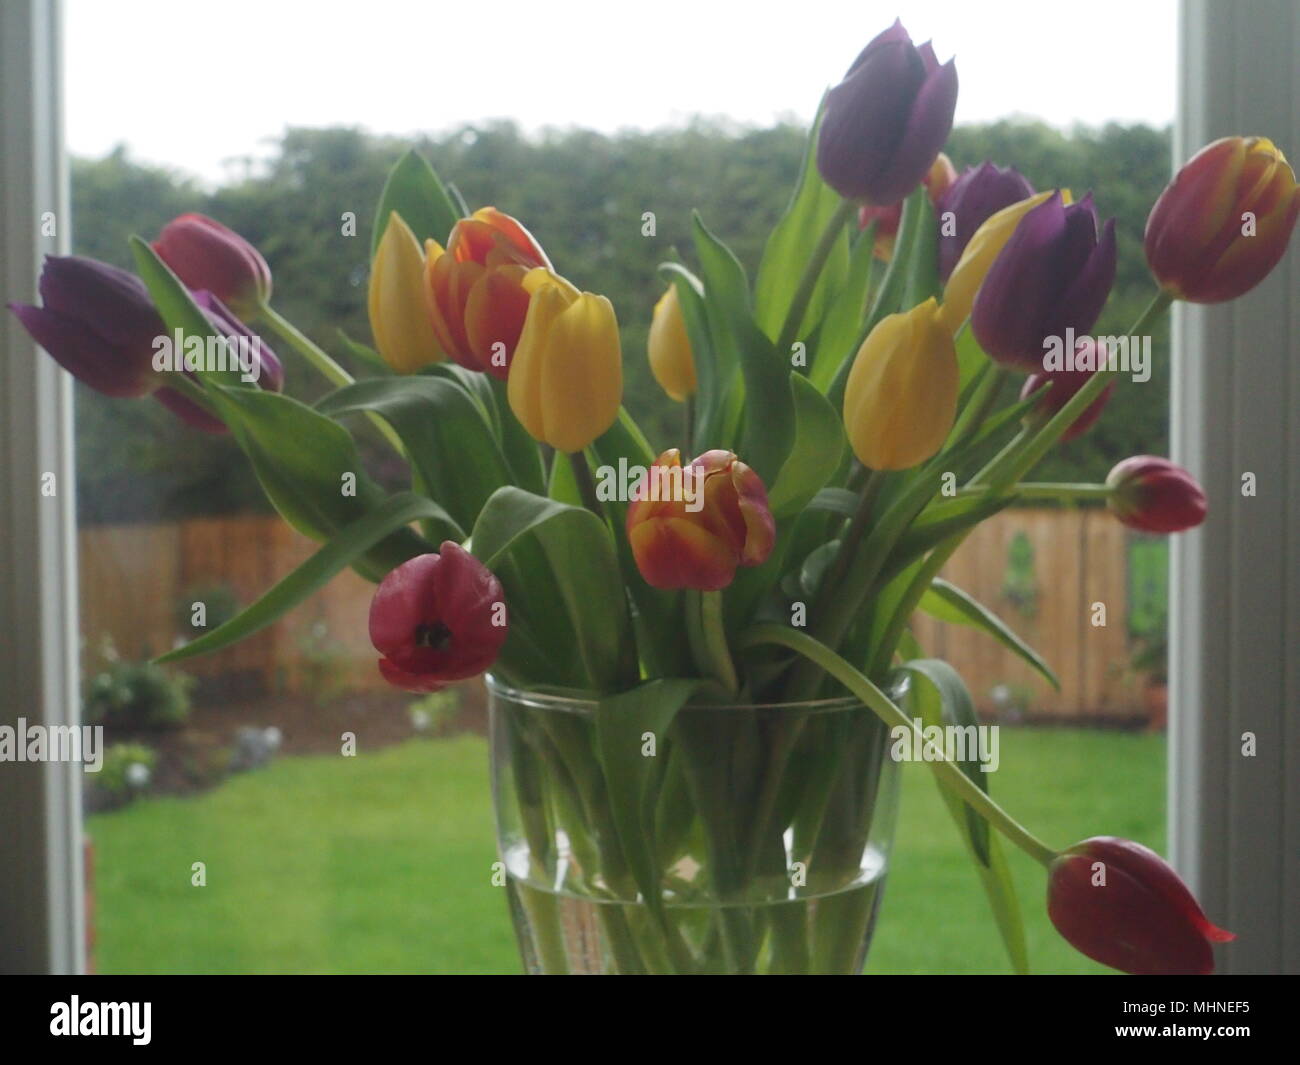 Bunch of flowers, tulips, many colours in vase Stock Photo